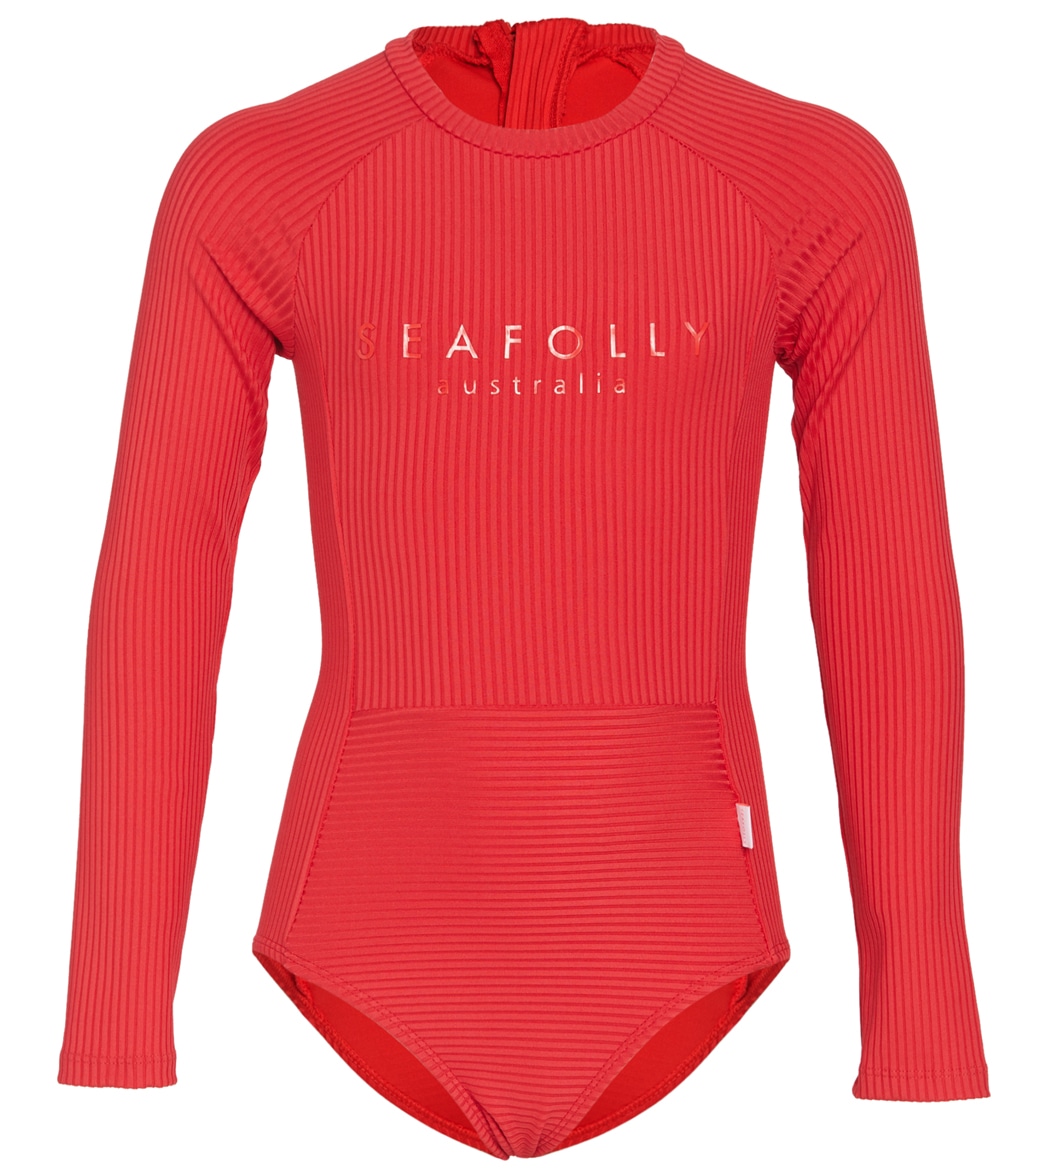 Seafolly Girls' Summer Essentials Long Sleeve One Piece Swimsuit Big Kid - Chilli Red 10 - Swimoutlet.com